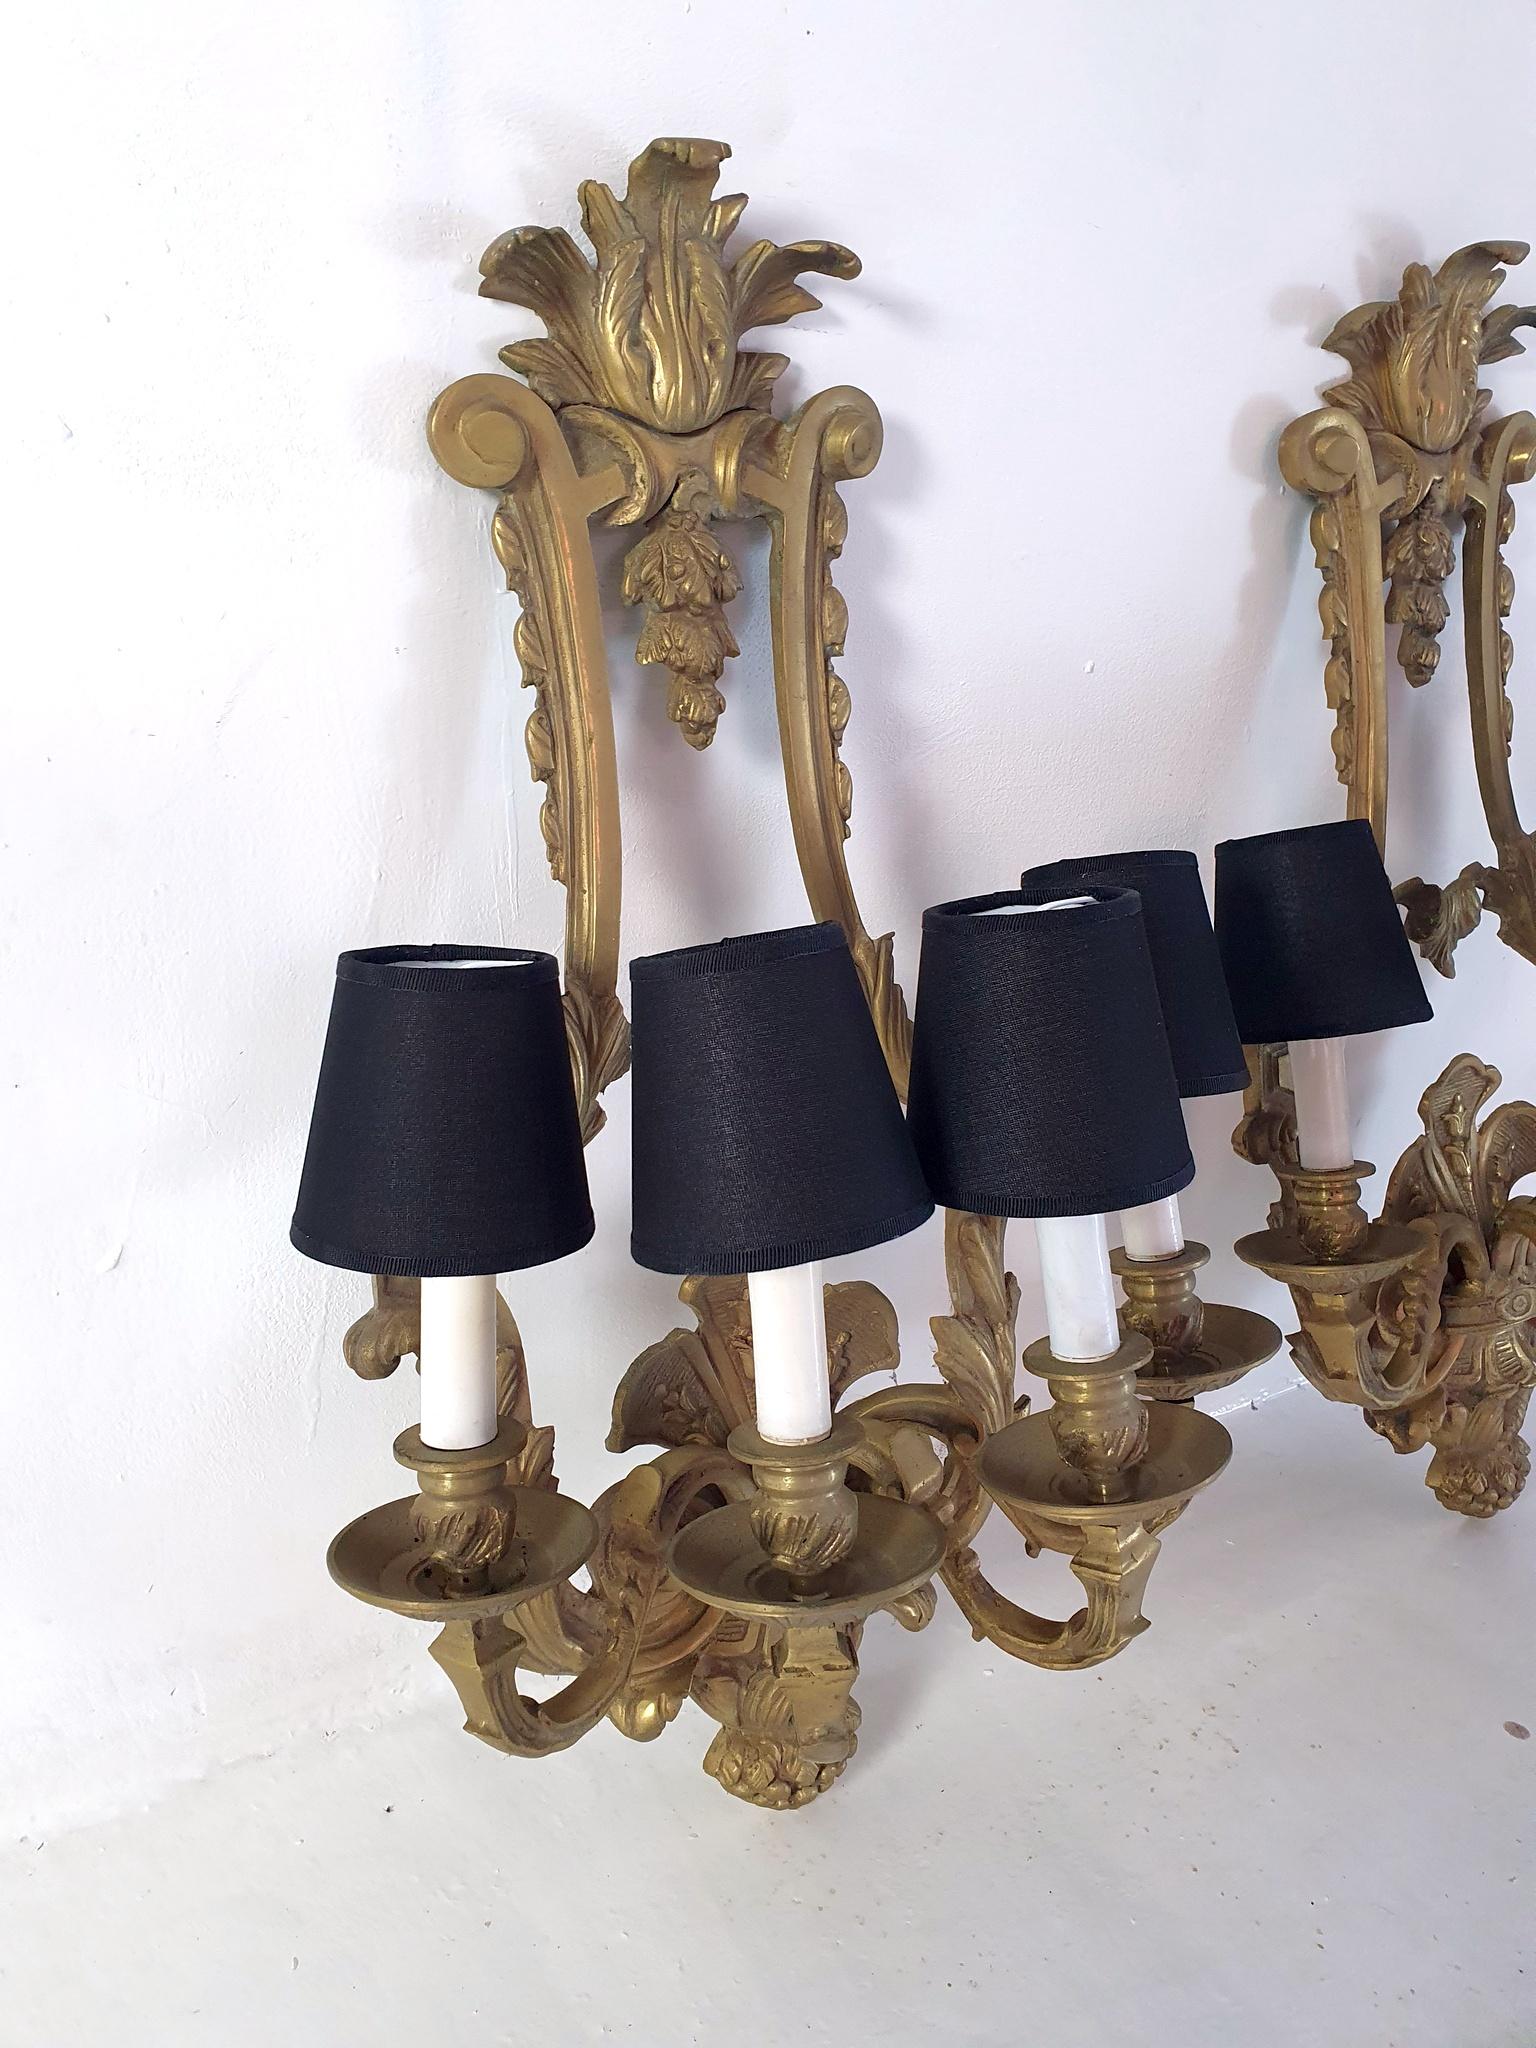 Large Bronze Wall Sconces Made in Italy In Excellent Condition For Sale In Albano Laziale, Rome/Lazio